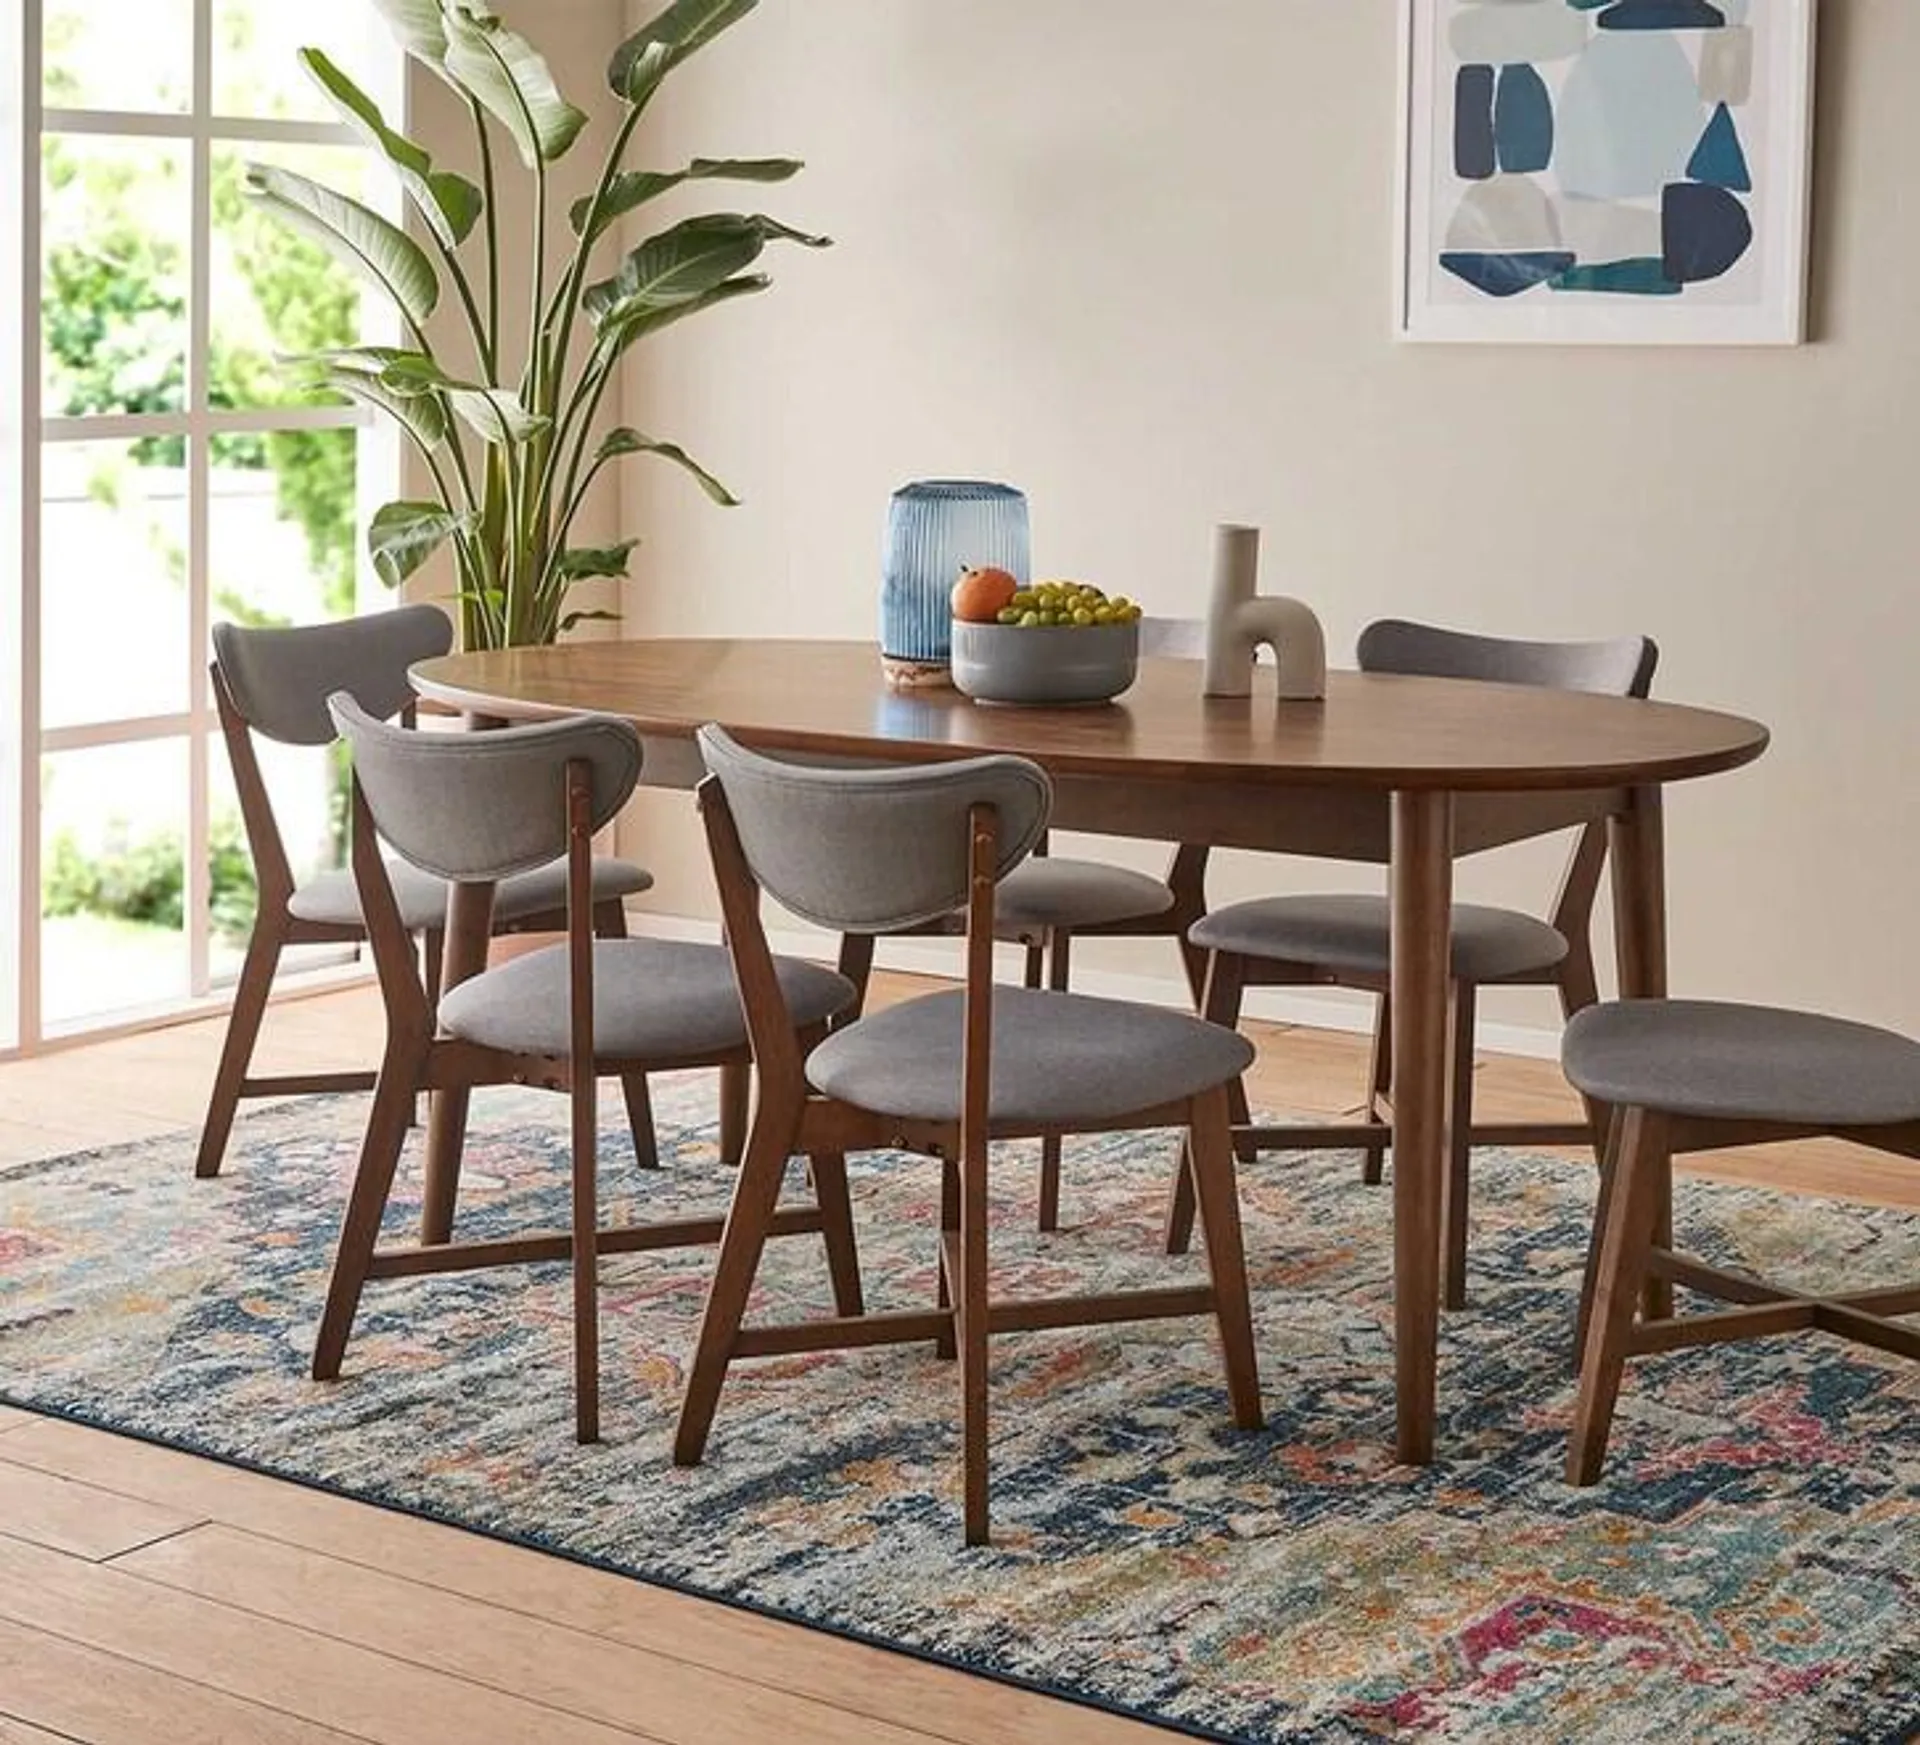 Draper 6 Seater Dining Table with Elke Chairs